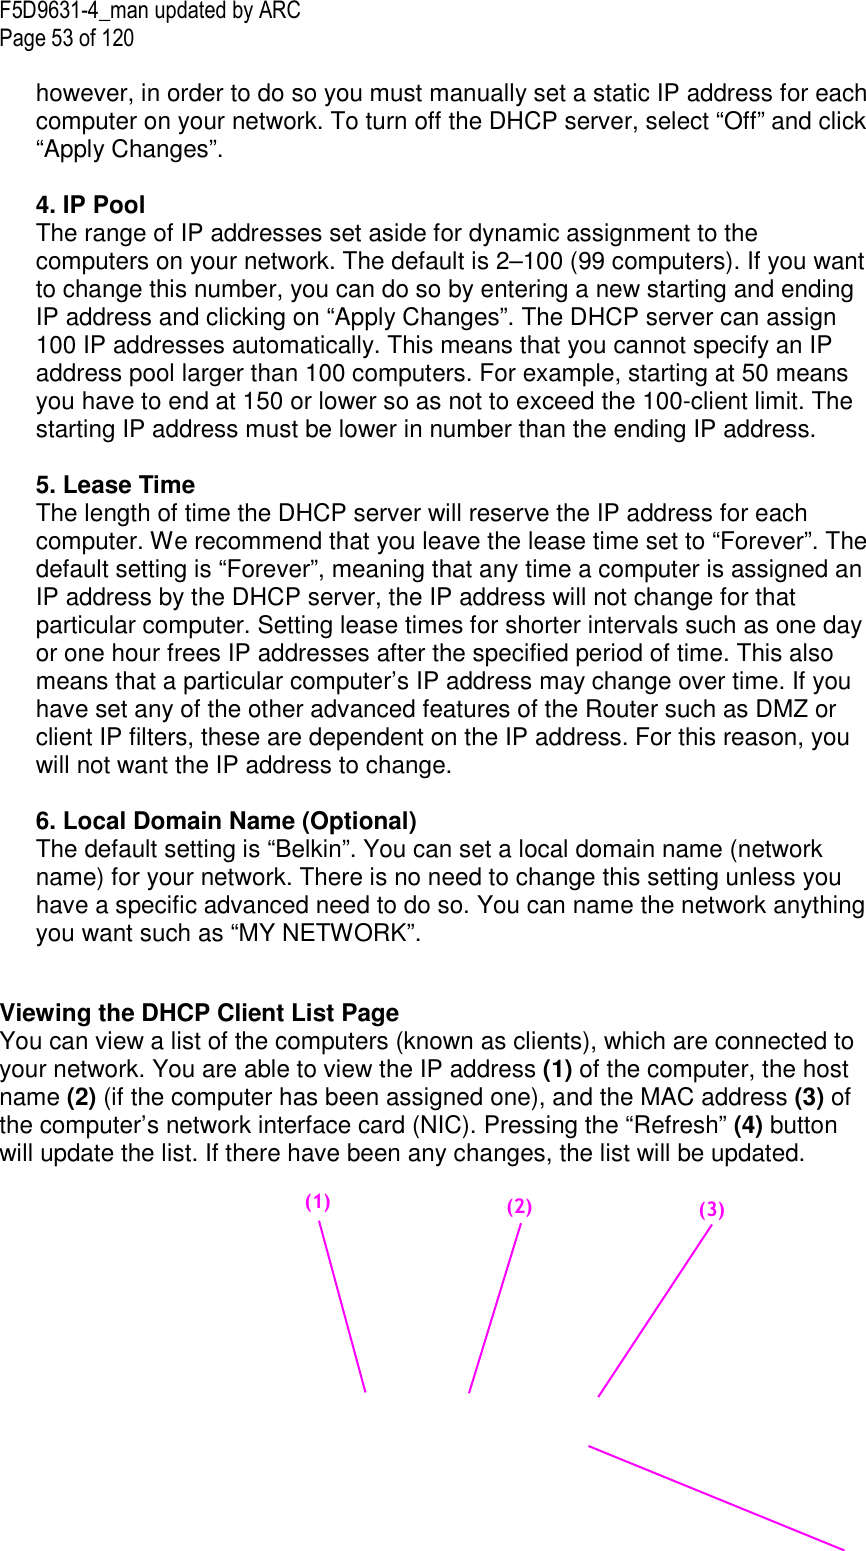 F5D9631-4_man updated by ARC Page 53 of 120  however, in order to do so you must manually set a static IP address for each computer on your network. To turn off the DHCP server, select “Off” and click “Apply Changes”.  4. IP Pool  The range of IP addresses set aside for dynamic assignment to the computers on your network. The default is 2–100 (99 computers). If you want to change this number, you can do so by entering a new starting and ending IP address and clicking on “Apply Changes”. The DHCP server can assign 100 IP addresses automatically. This means that you cannot specify an IP address pool larger than 100 computers. For example, starting at 50 means you have to end at 150 or lower so as not to exceed the 100-client limit. The starting IP address must be lower in number than the ending IP address.  5. Lease Time  The length of time the DHCP server will reserve the IP address for each computer. We recommend that you leave the lease time set to “Forever”. The default setting is “Forever”, meaning that any time a computer is assigned an IP address by the DHCP server, the IP address will not change for that particular computer. Setting lease times for shorter intervals such as one day or one hour frees IP addresses after the specified period of time. This also means that a particular computer’s IP address may change over time. If you have set any of the other advanced features of the Router such as DMZ or client IP filters, these are dependent on the IP address. For this reason, you will not want the IP address to change.   6. Local Domain Name (Optional) The default setting is “Belkin”. You can set a local domain name (network name) for your network. There is no need to change this setting unless you have a specific advanced need to do so. You can name the network anything you want such as “MY NETWORK”.   Viewing the DHCP Client List Page You can view a list of the computers (known as clients), which are connected to your network. You are able to view the IP address (1) of the computer, the host name (2) (if the computer has been assigned one), and the MAC address (3) of the computer’s network interface card (NIC). Pressing the “Refresh” (4) button will update the list. If there have been any changes, the list will be updated.    (2)     (3)     (1)     